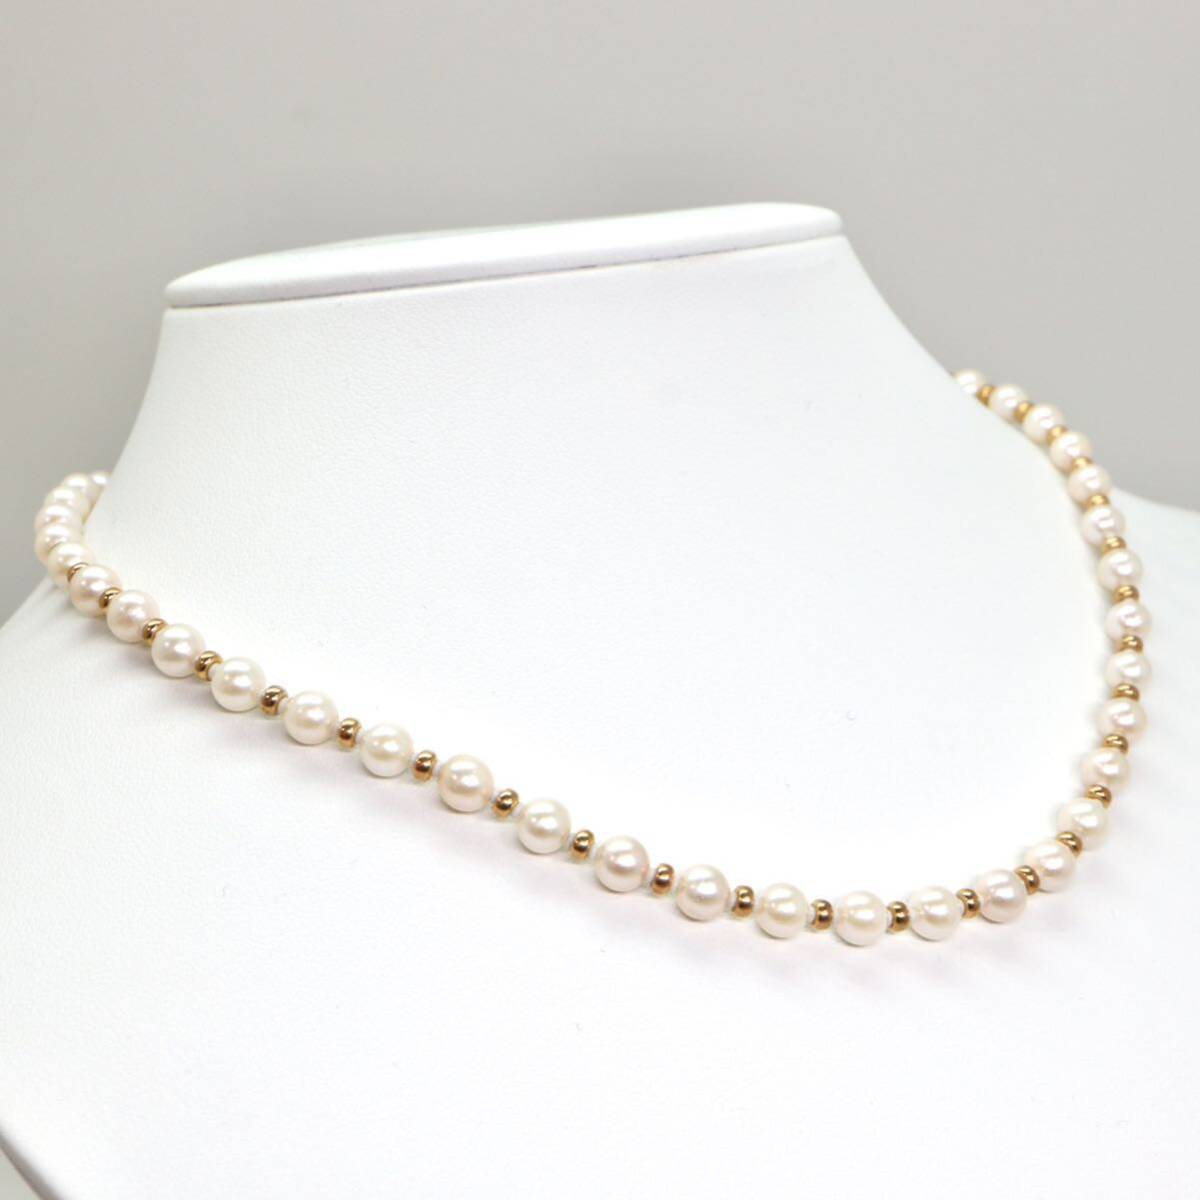 ◆K18 アコヤ本真珠ネックレス/ 0 ◆A 約12.0g 約42.0cm 5.0mm珠 pearl パール jewelry necklace ジュエリー EA5/EB0の画像3